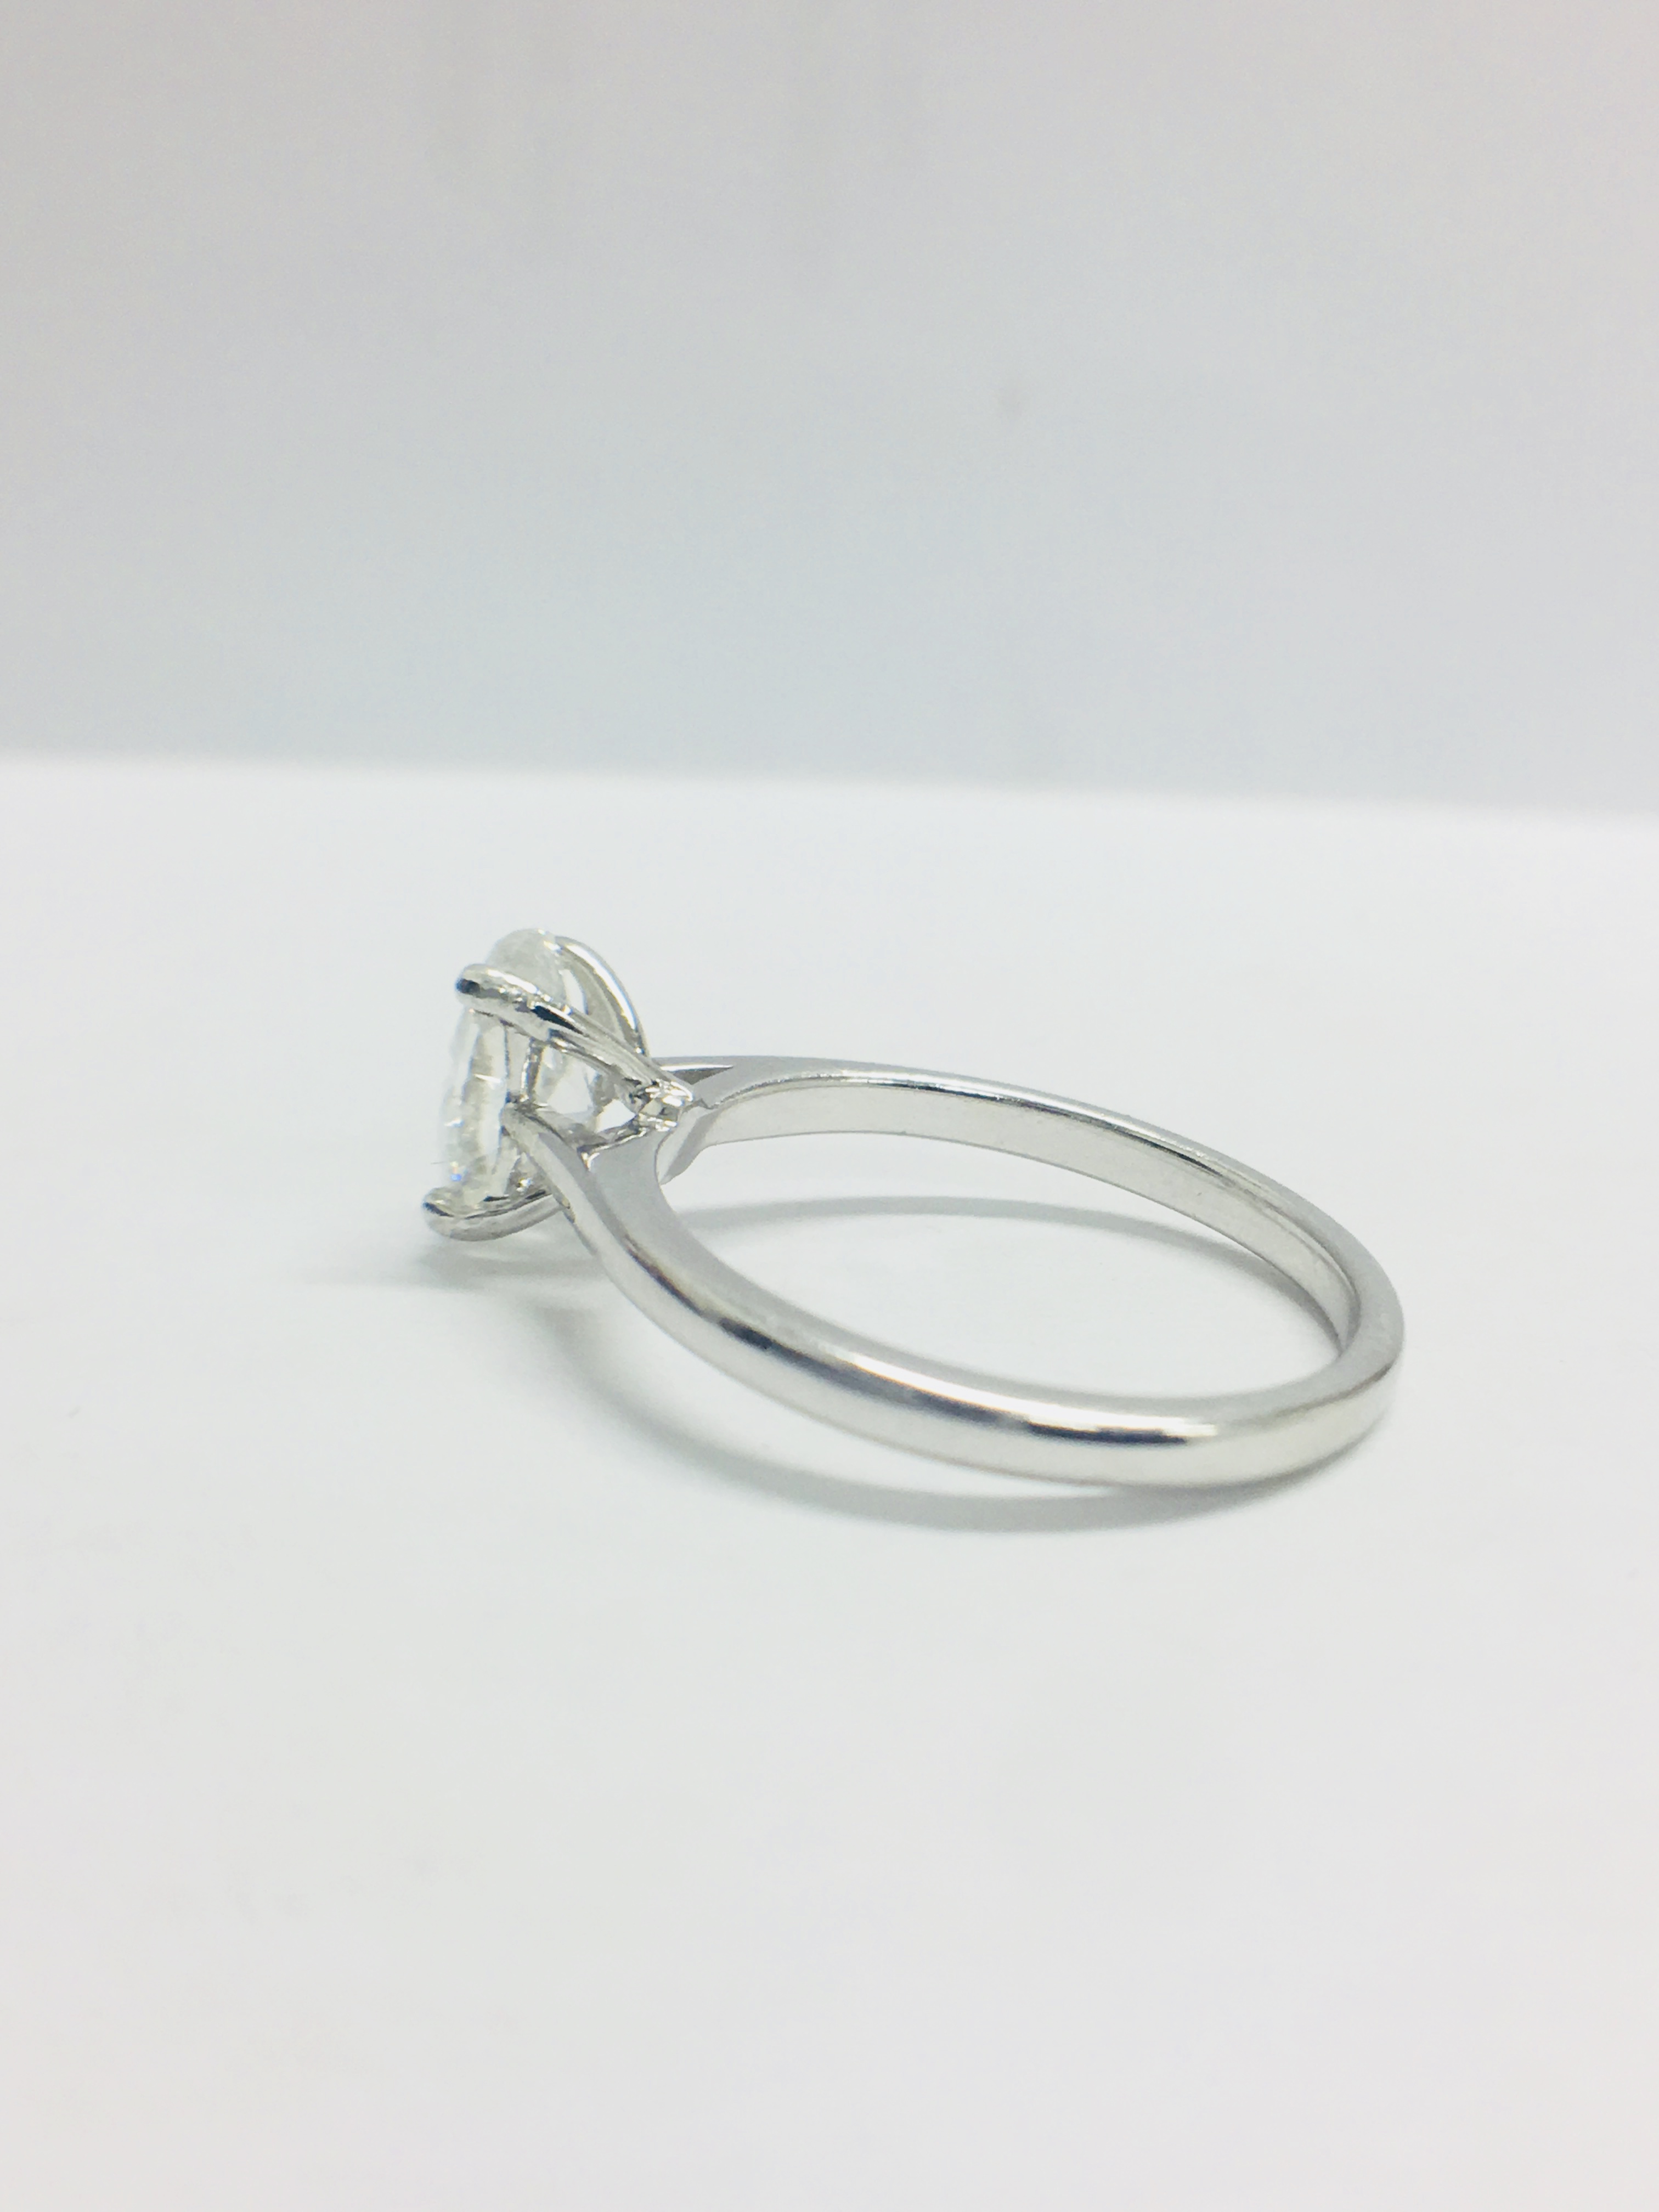 Platinum Oval Cut Diamond Solitaire Ring, - Image 5 of 9